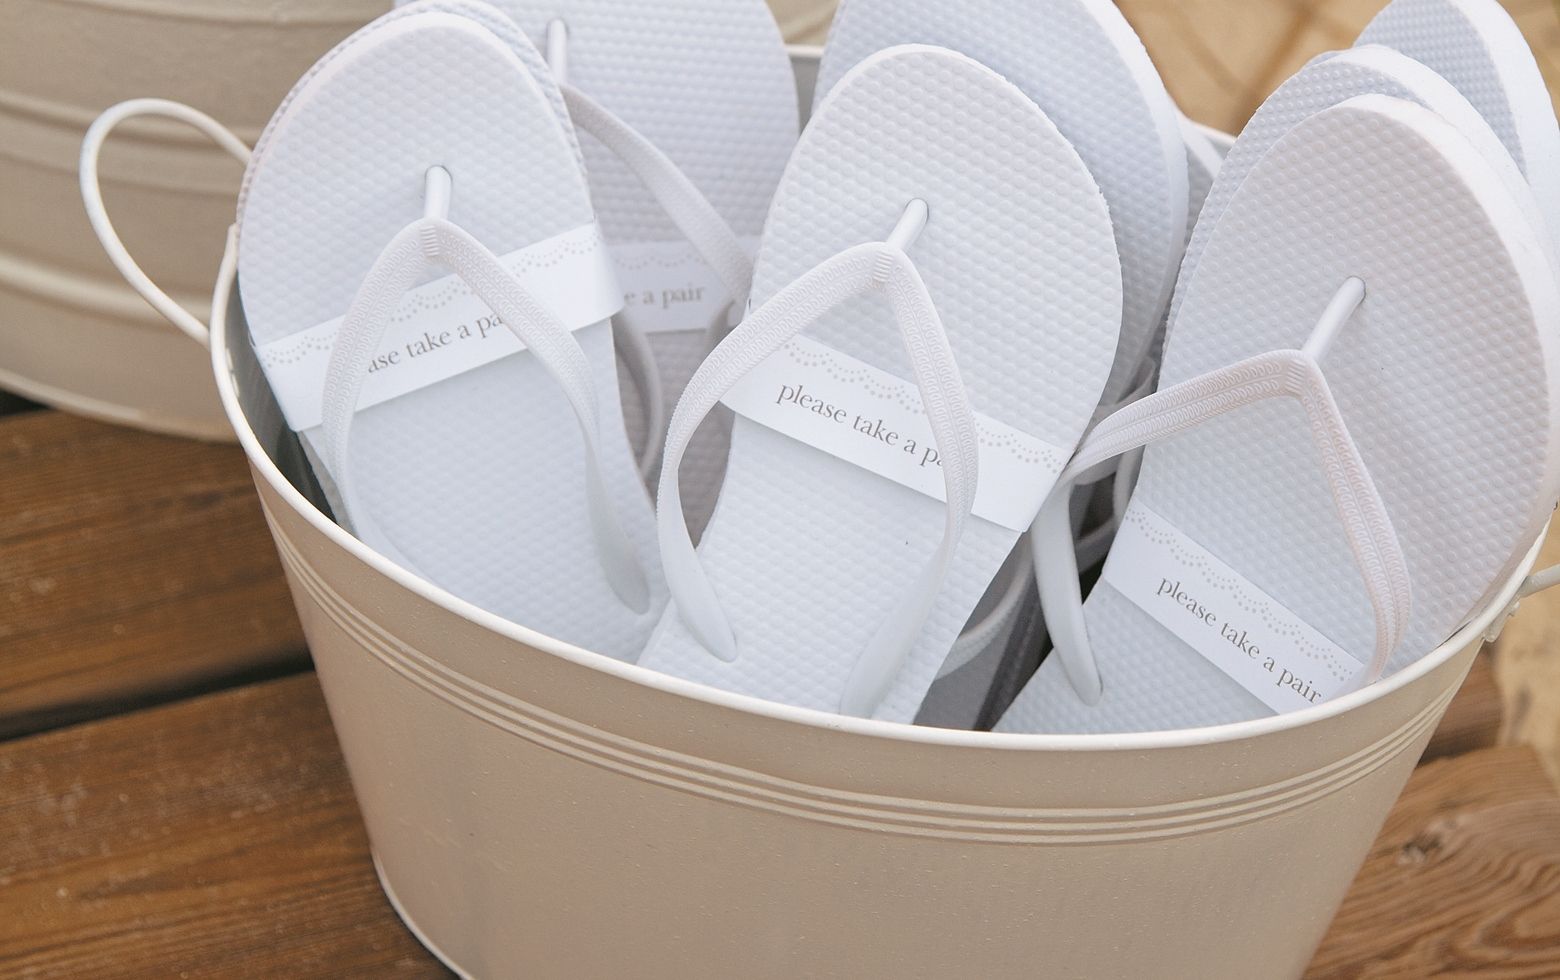 Flip Flops For Weddings Are A Lifesaver! Know How! post thumbnail image